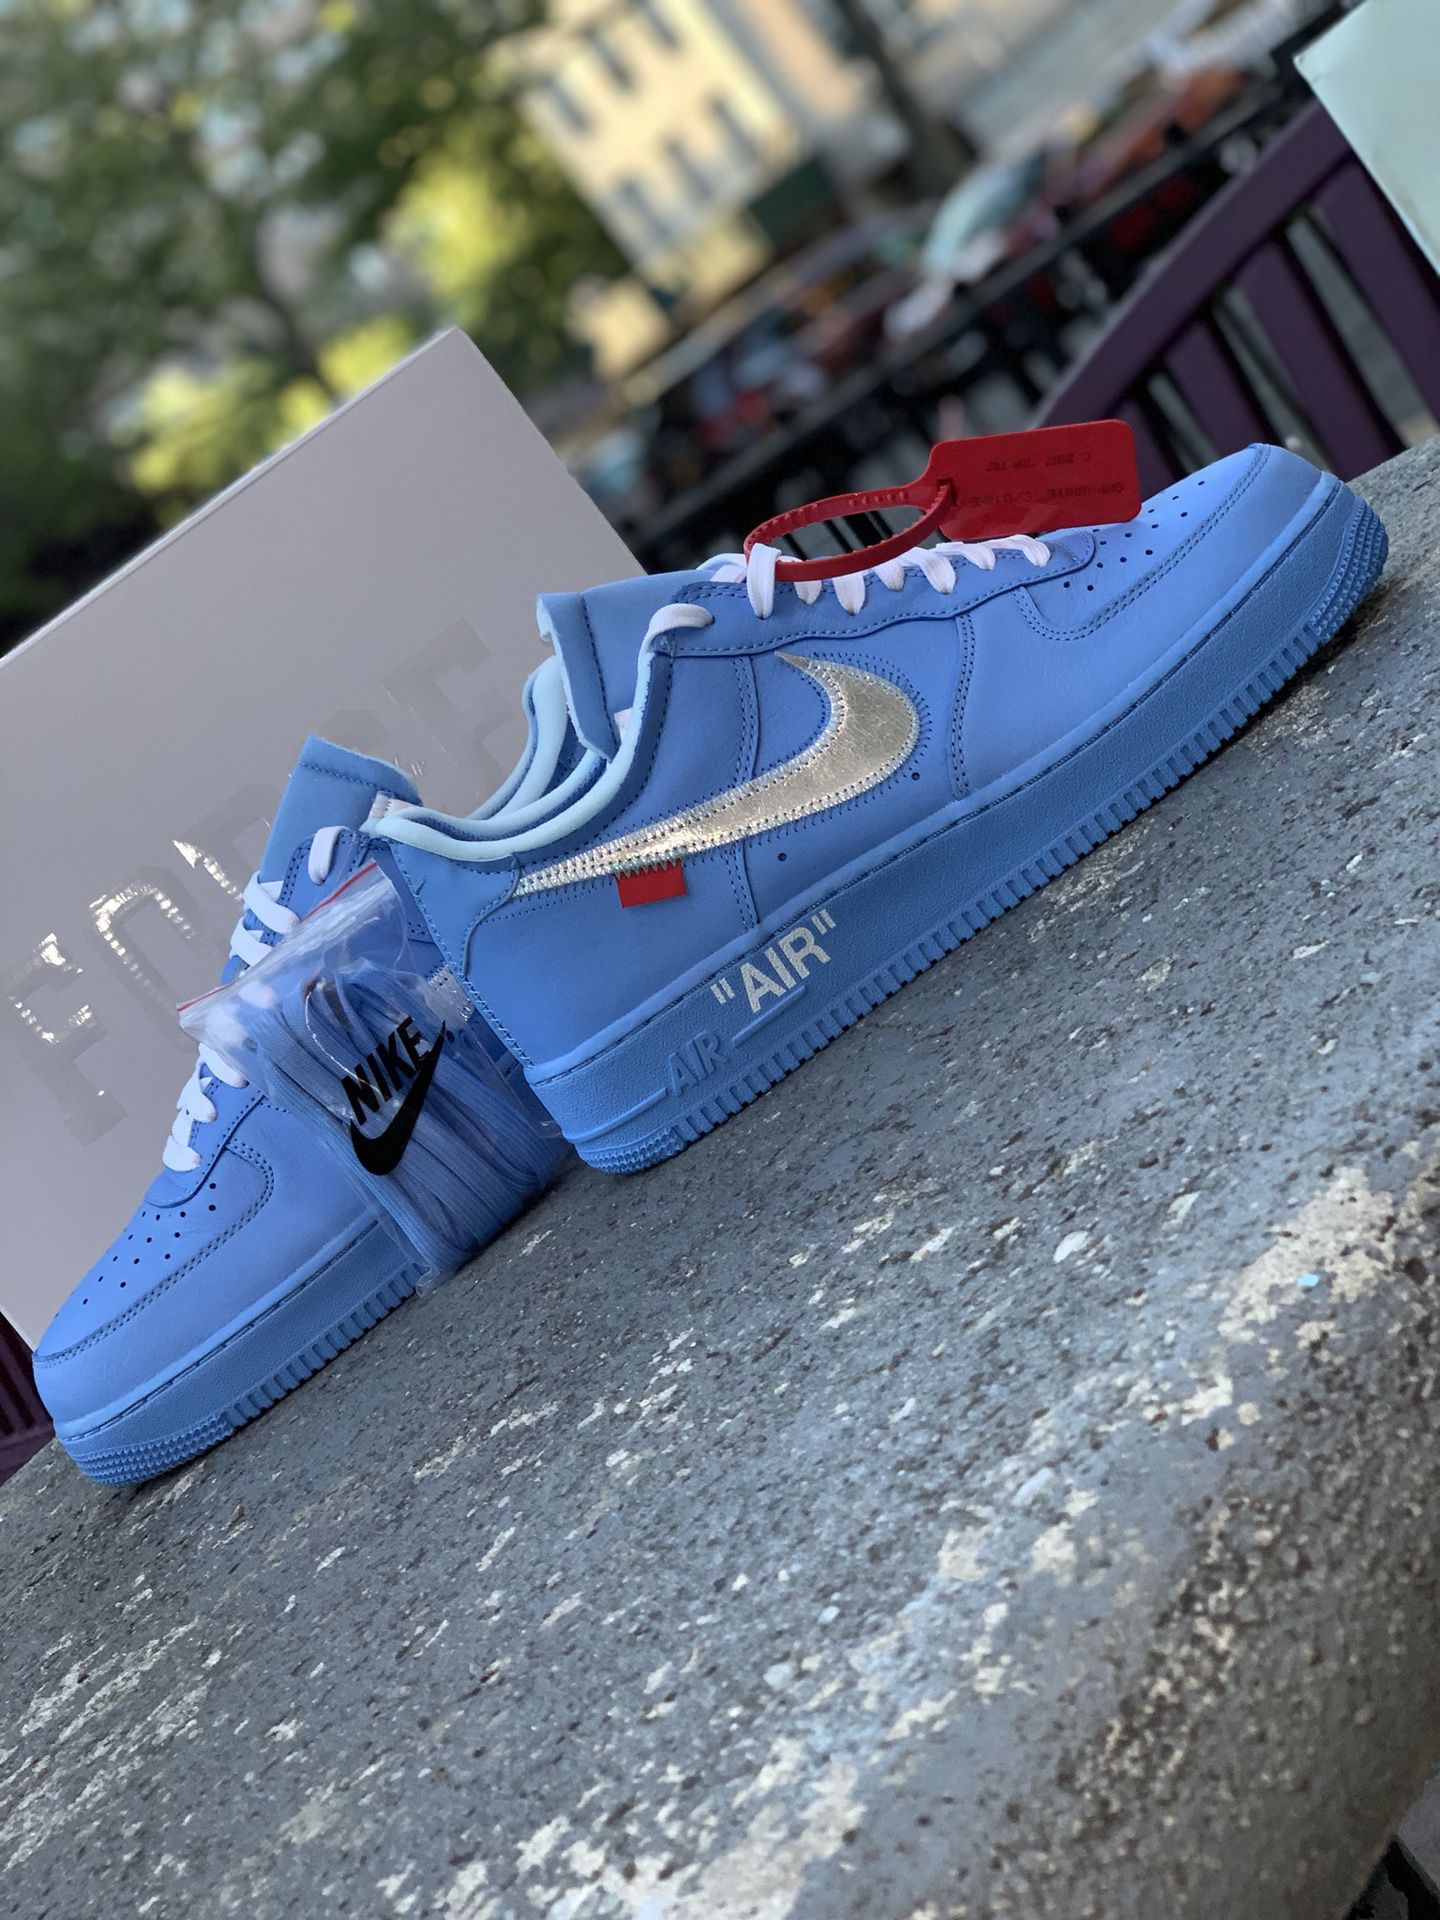 Off White Nike MoMa Air Force 1 for Sale in Brentwood, NC - OfferUp